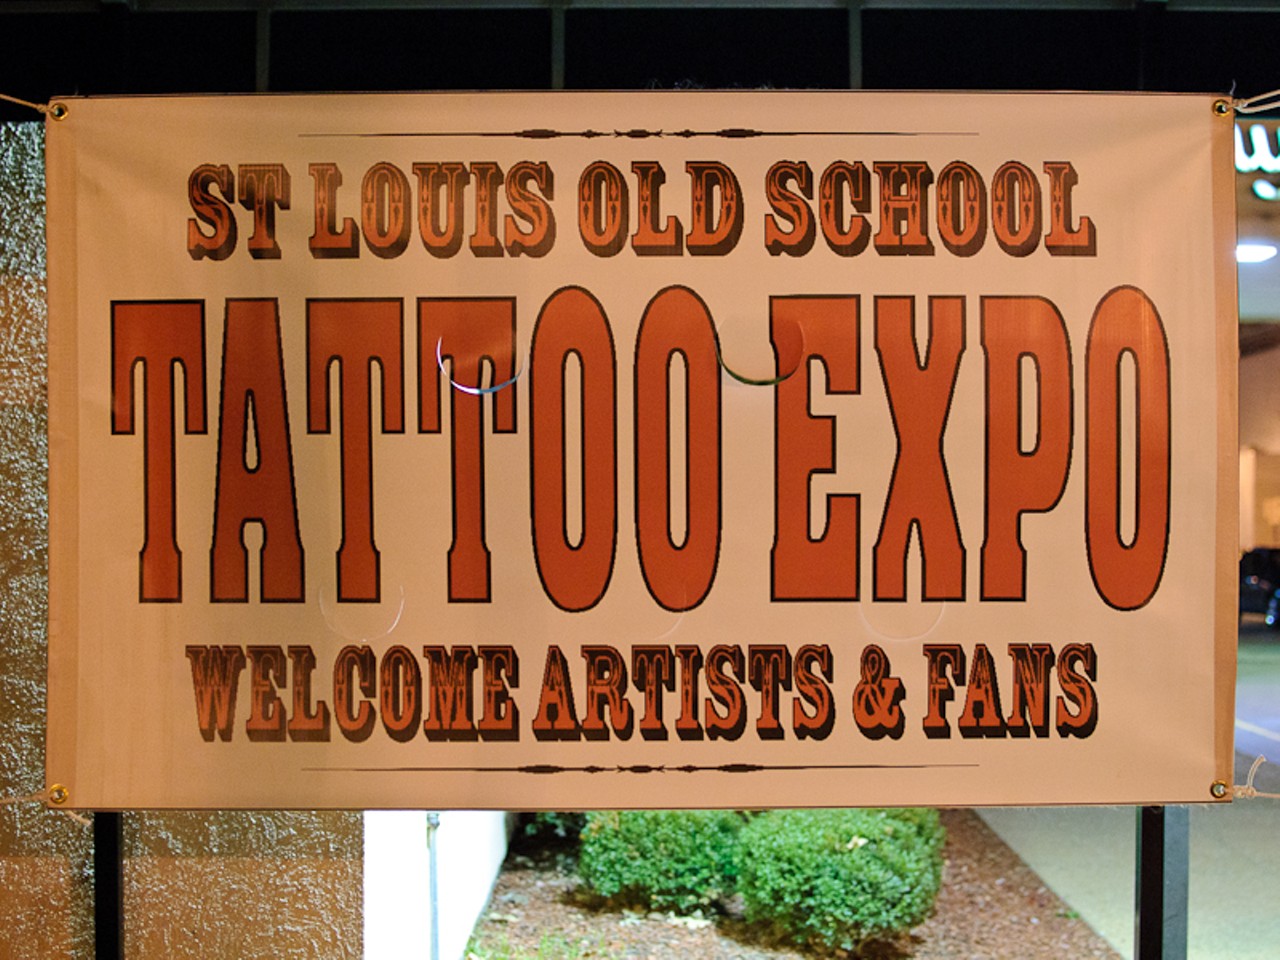 Lyle Tuttle's Saint Louis Old School Tattoo Expo was held Friday through Sunday (November 13 through 15, 2009) at the Holiday Inn Select (811 North Ninth Street.)